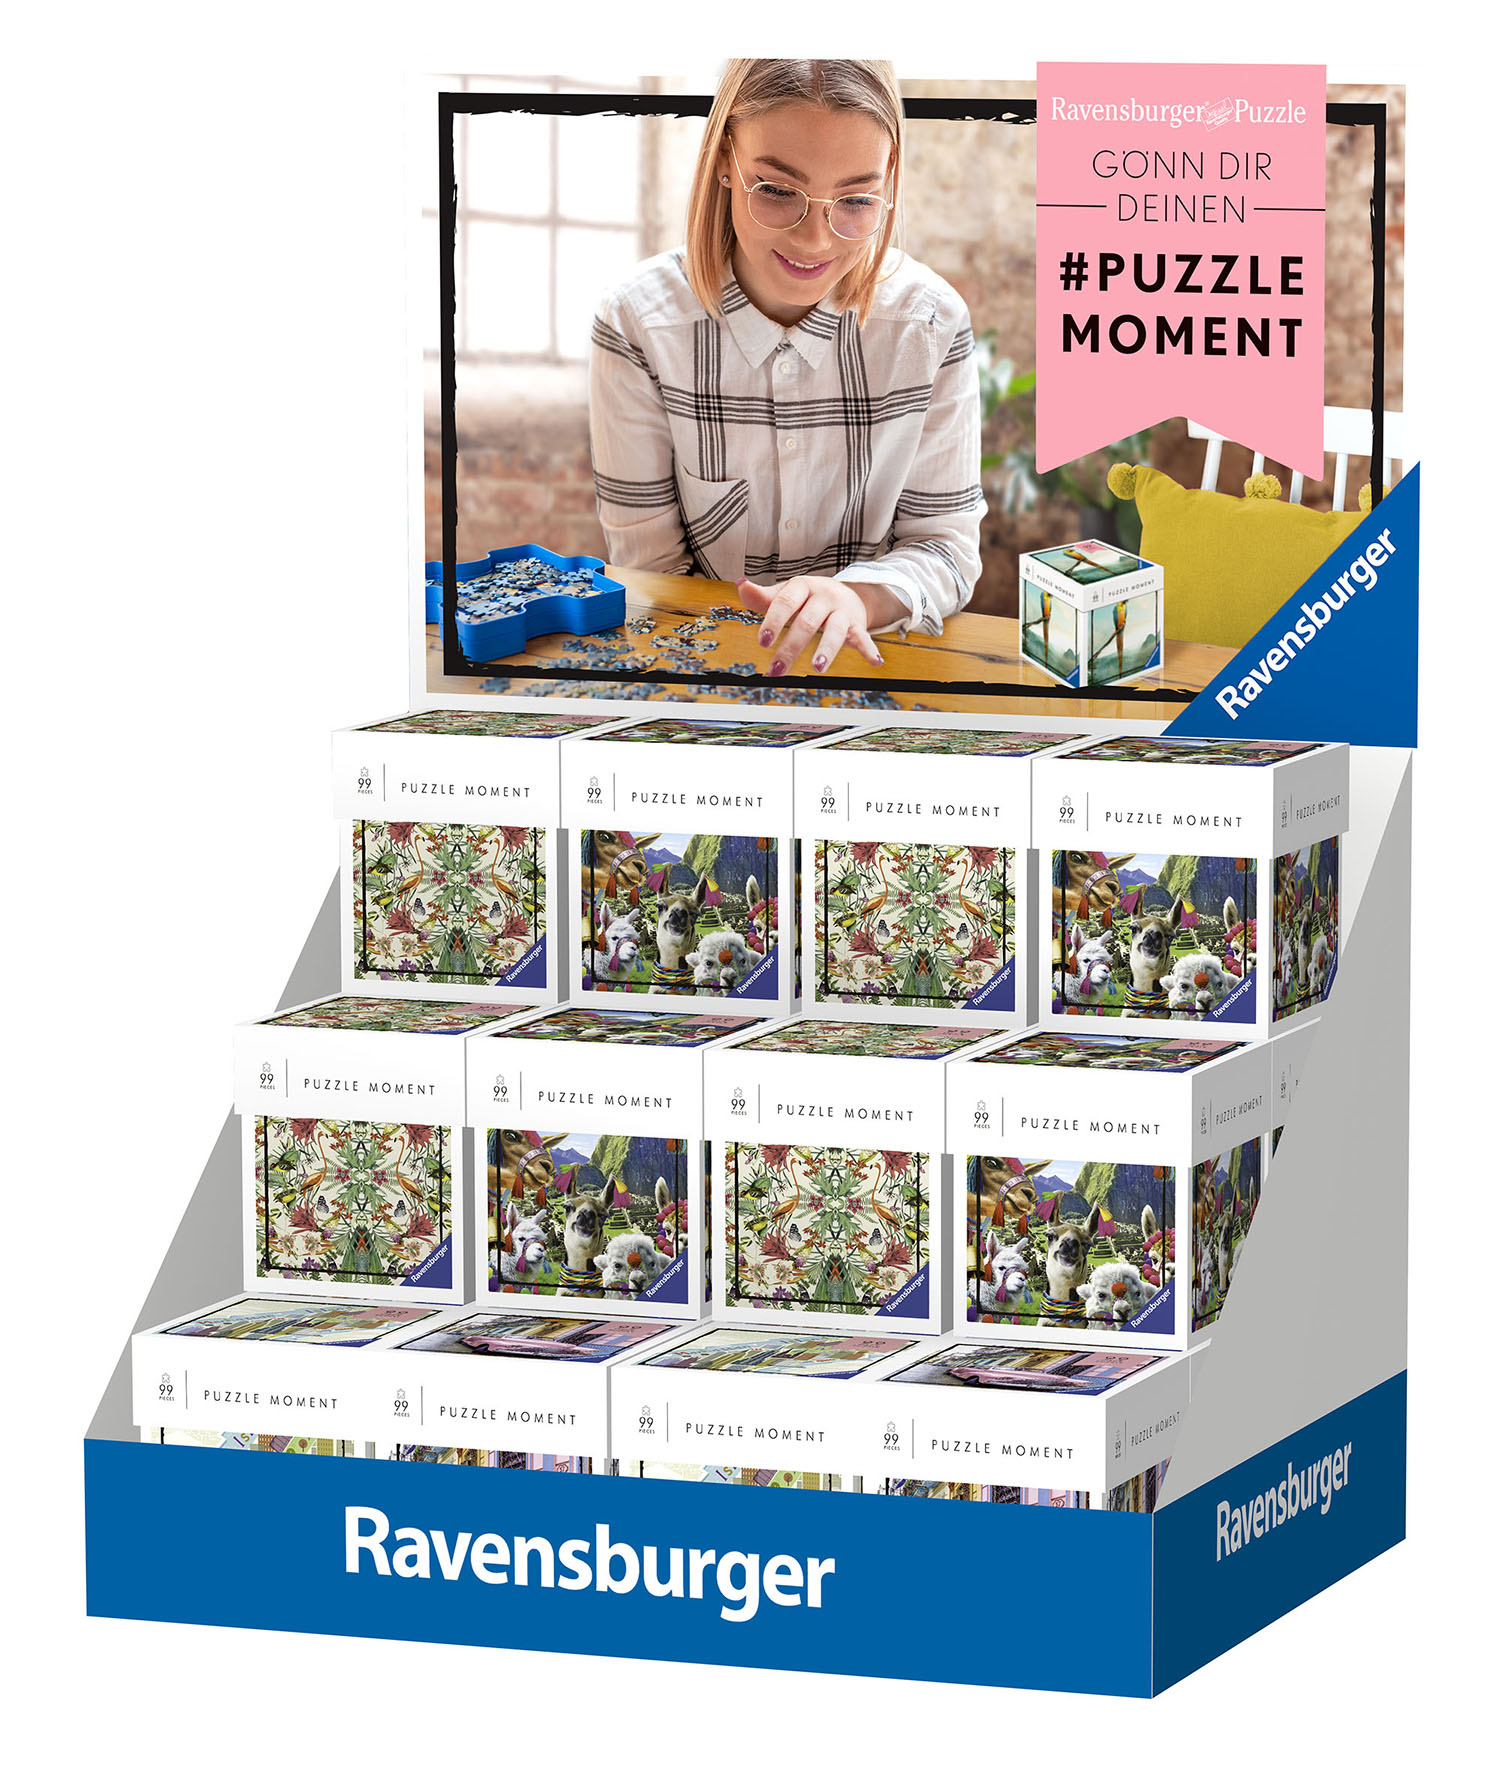 PUZZLE MOMENT DISPLAY